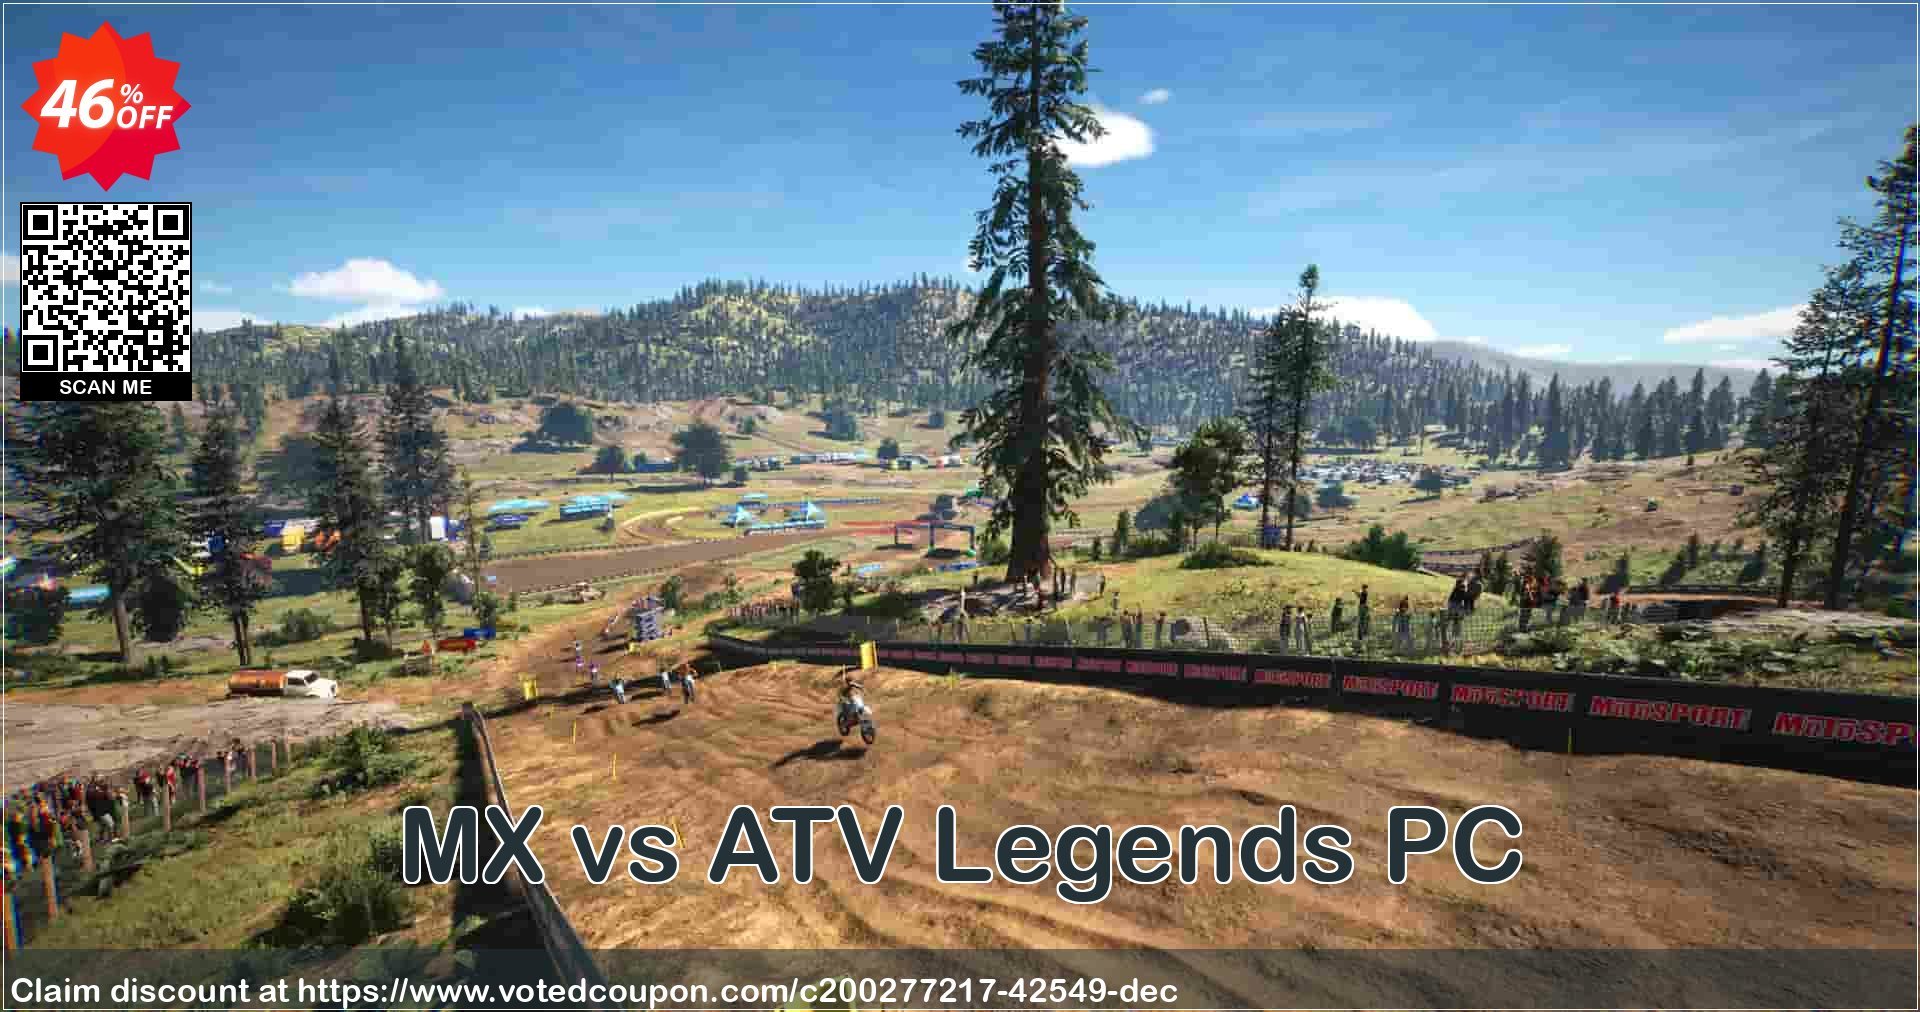 MX vs ATV Legends PC Coupon Code May 2024, 46% OFF - VotedCoupon